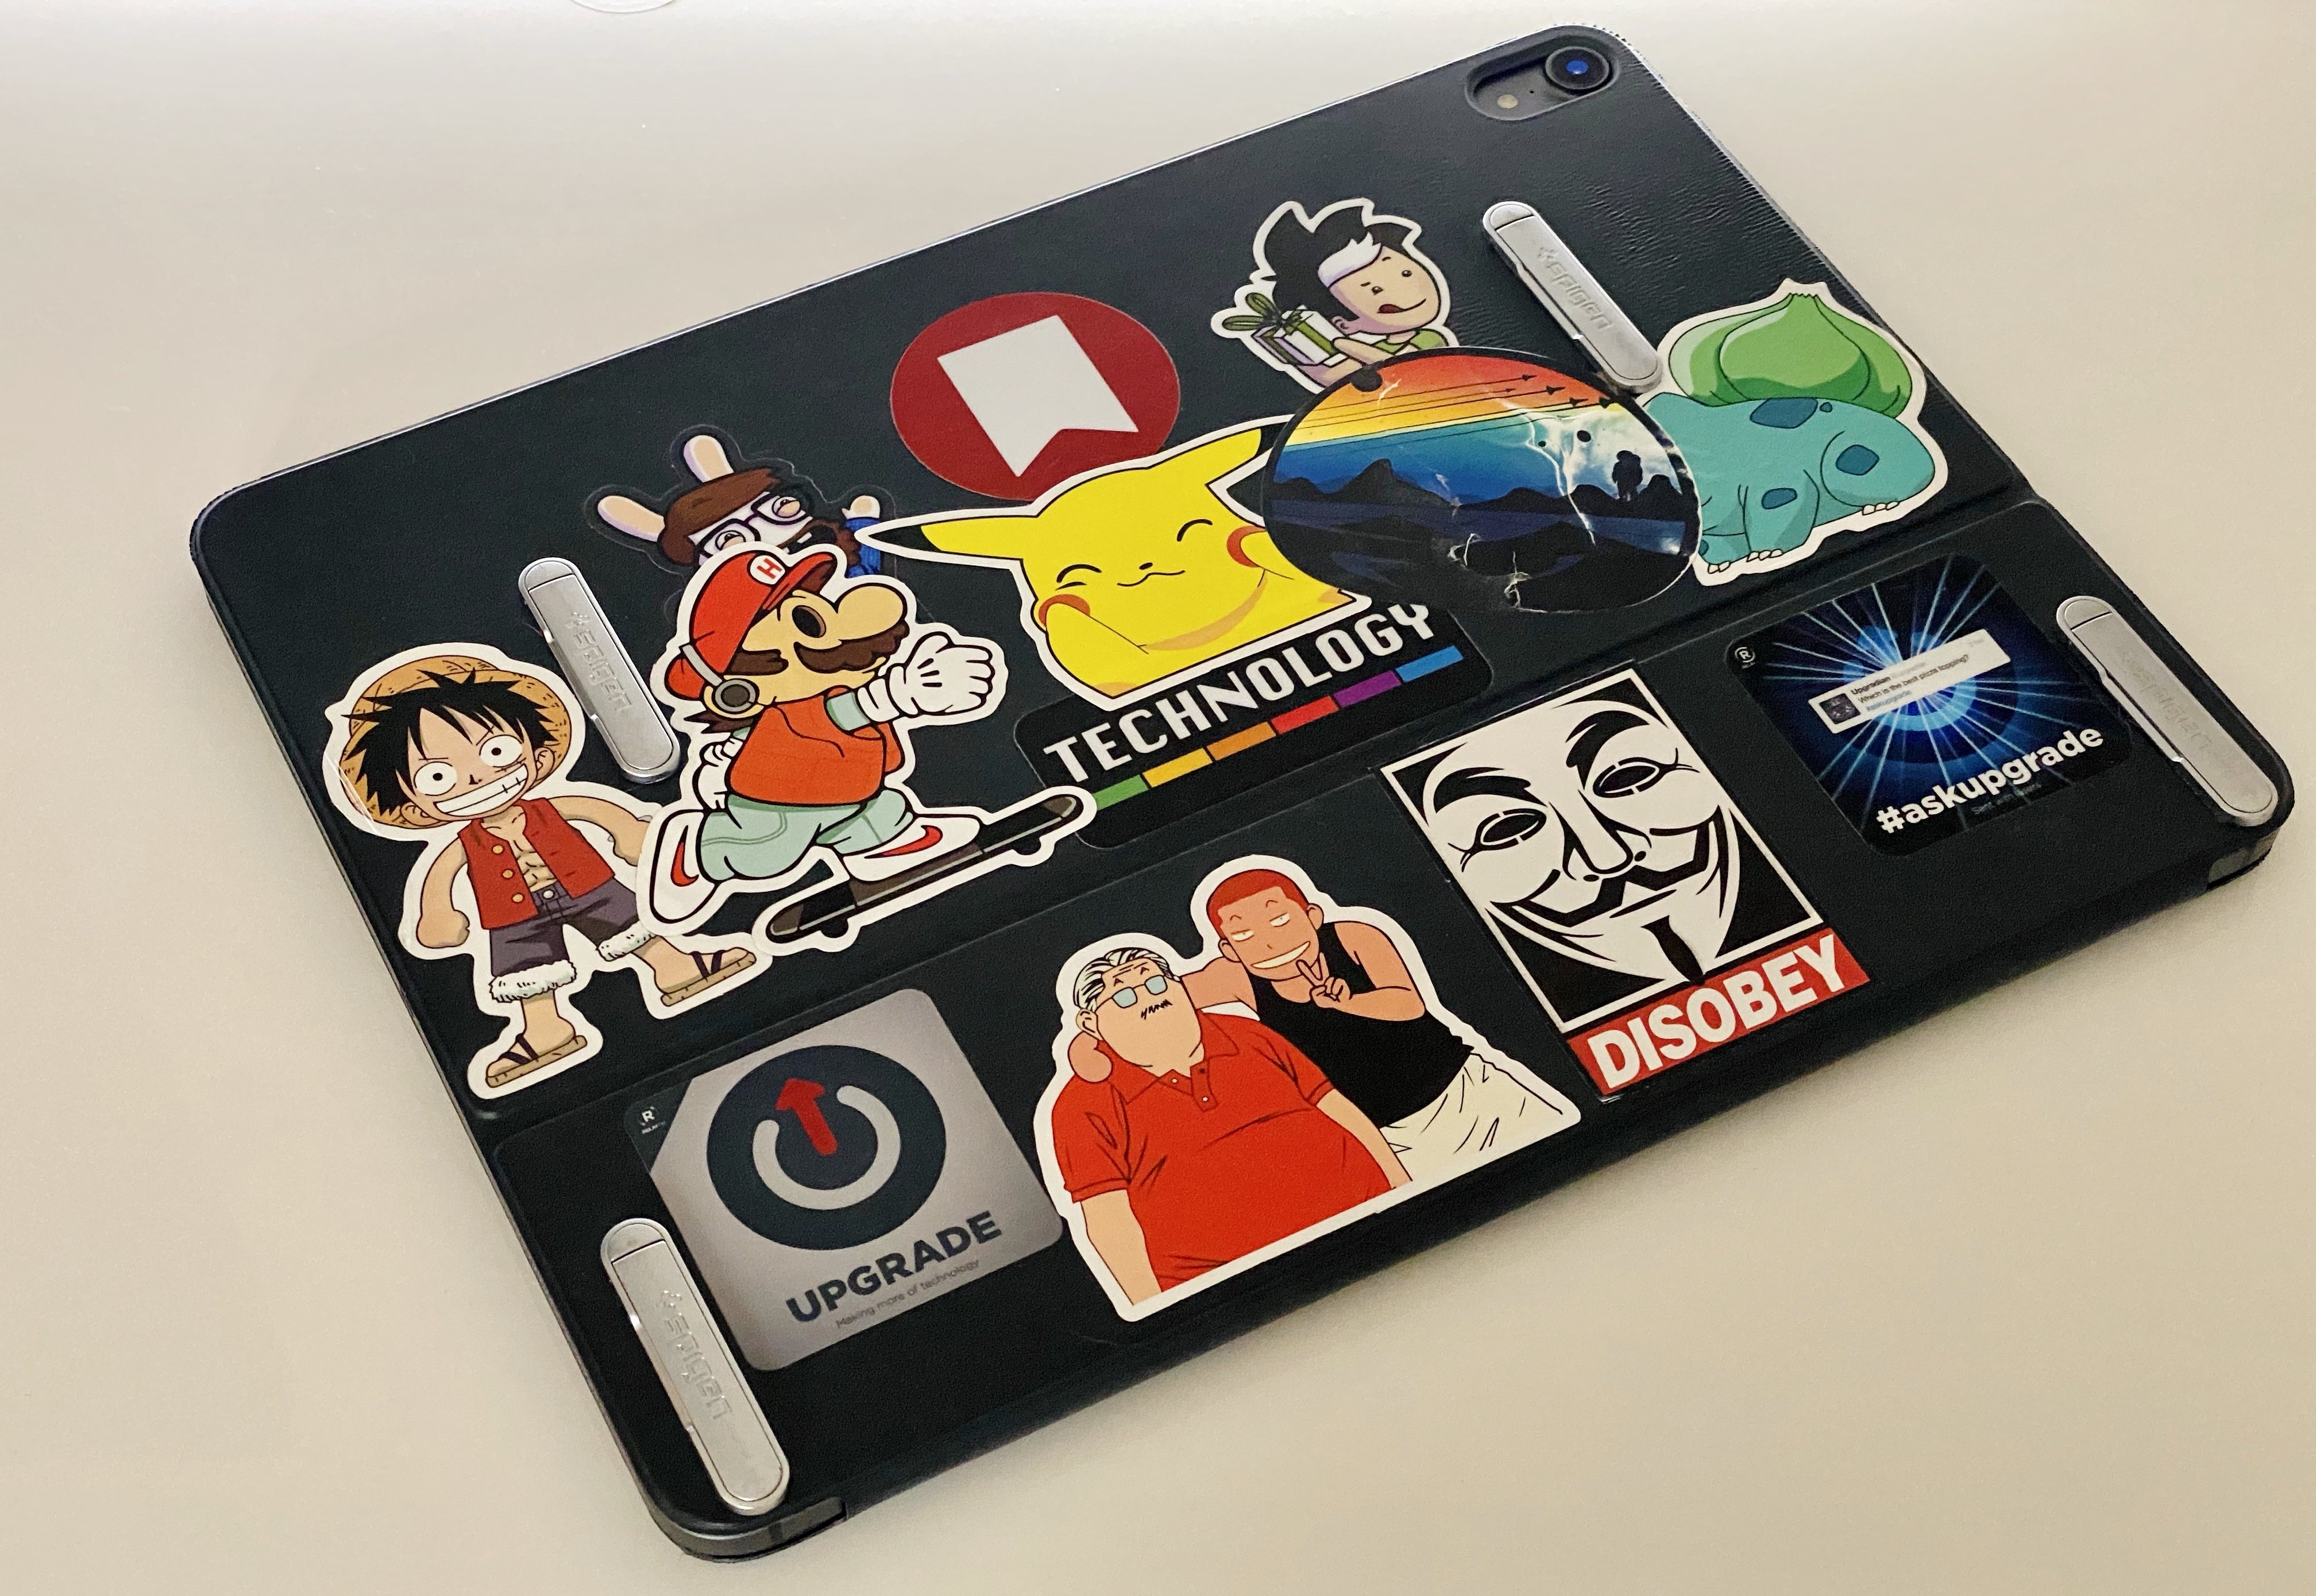 The new stickers are the result of WWDC 2019 plus an order of hundreds of assorted stickers from Amazon.